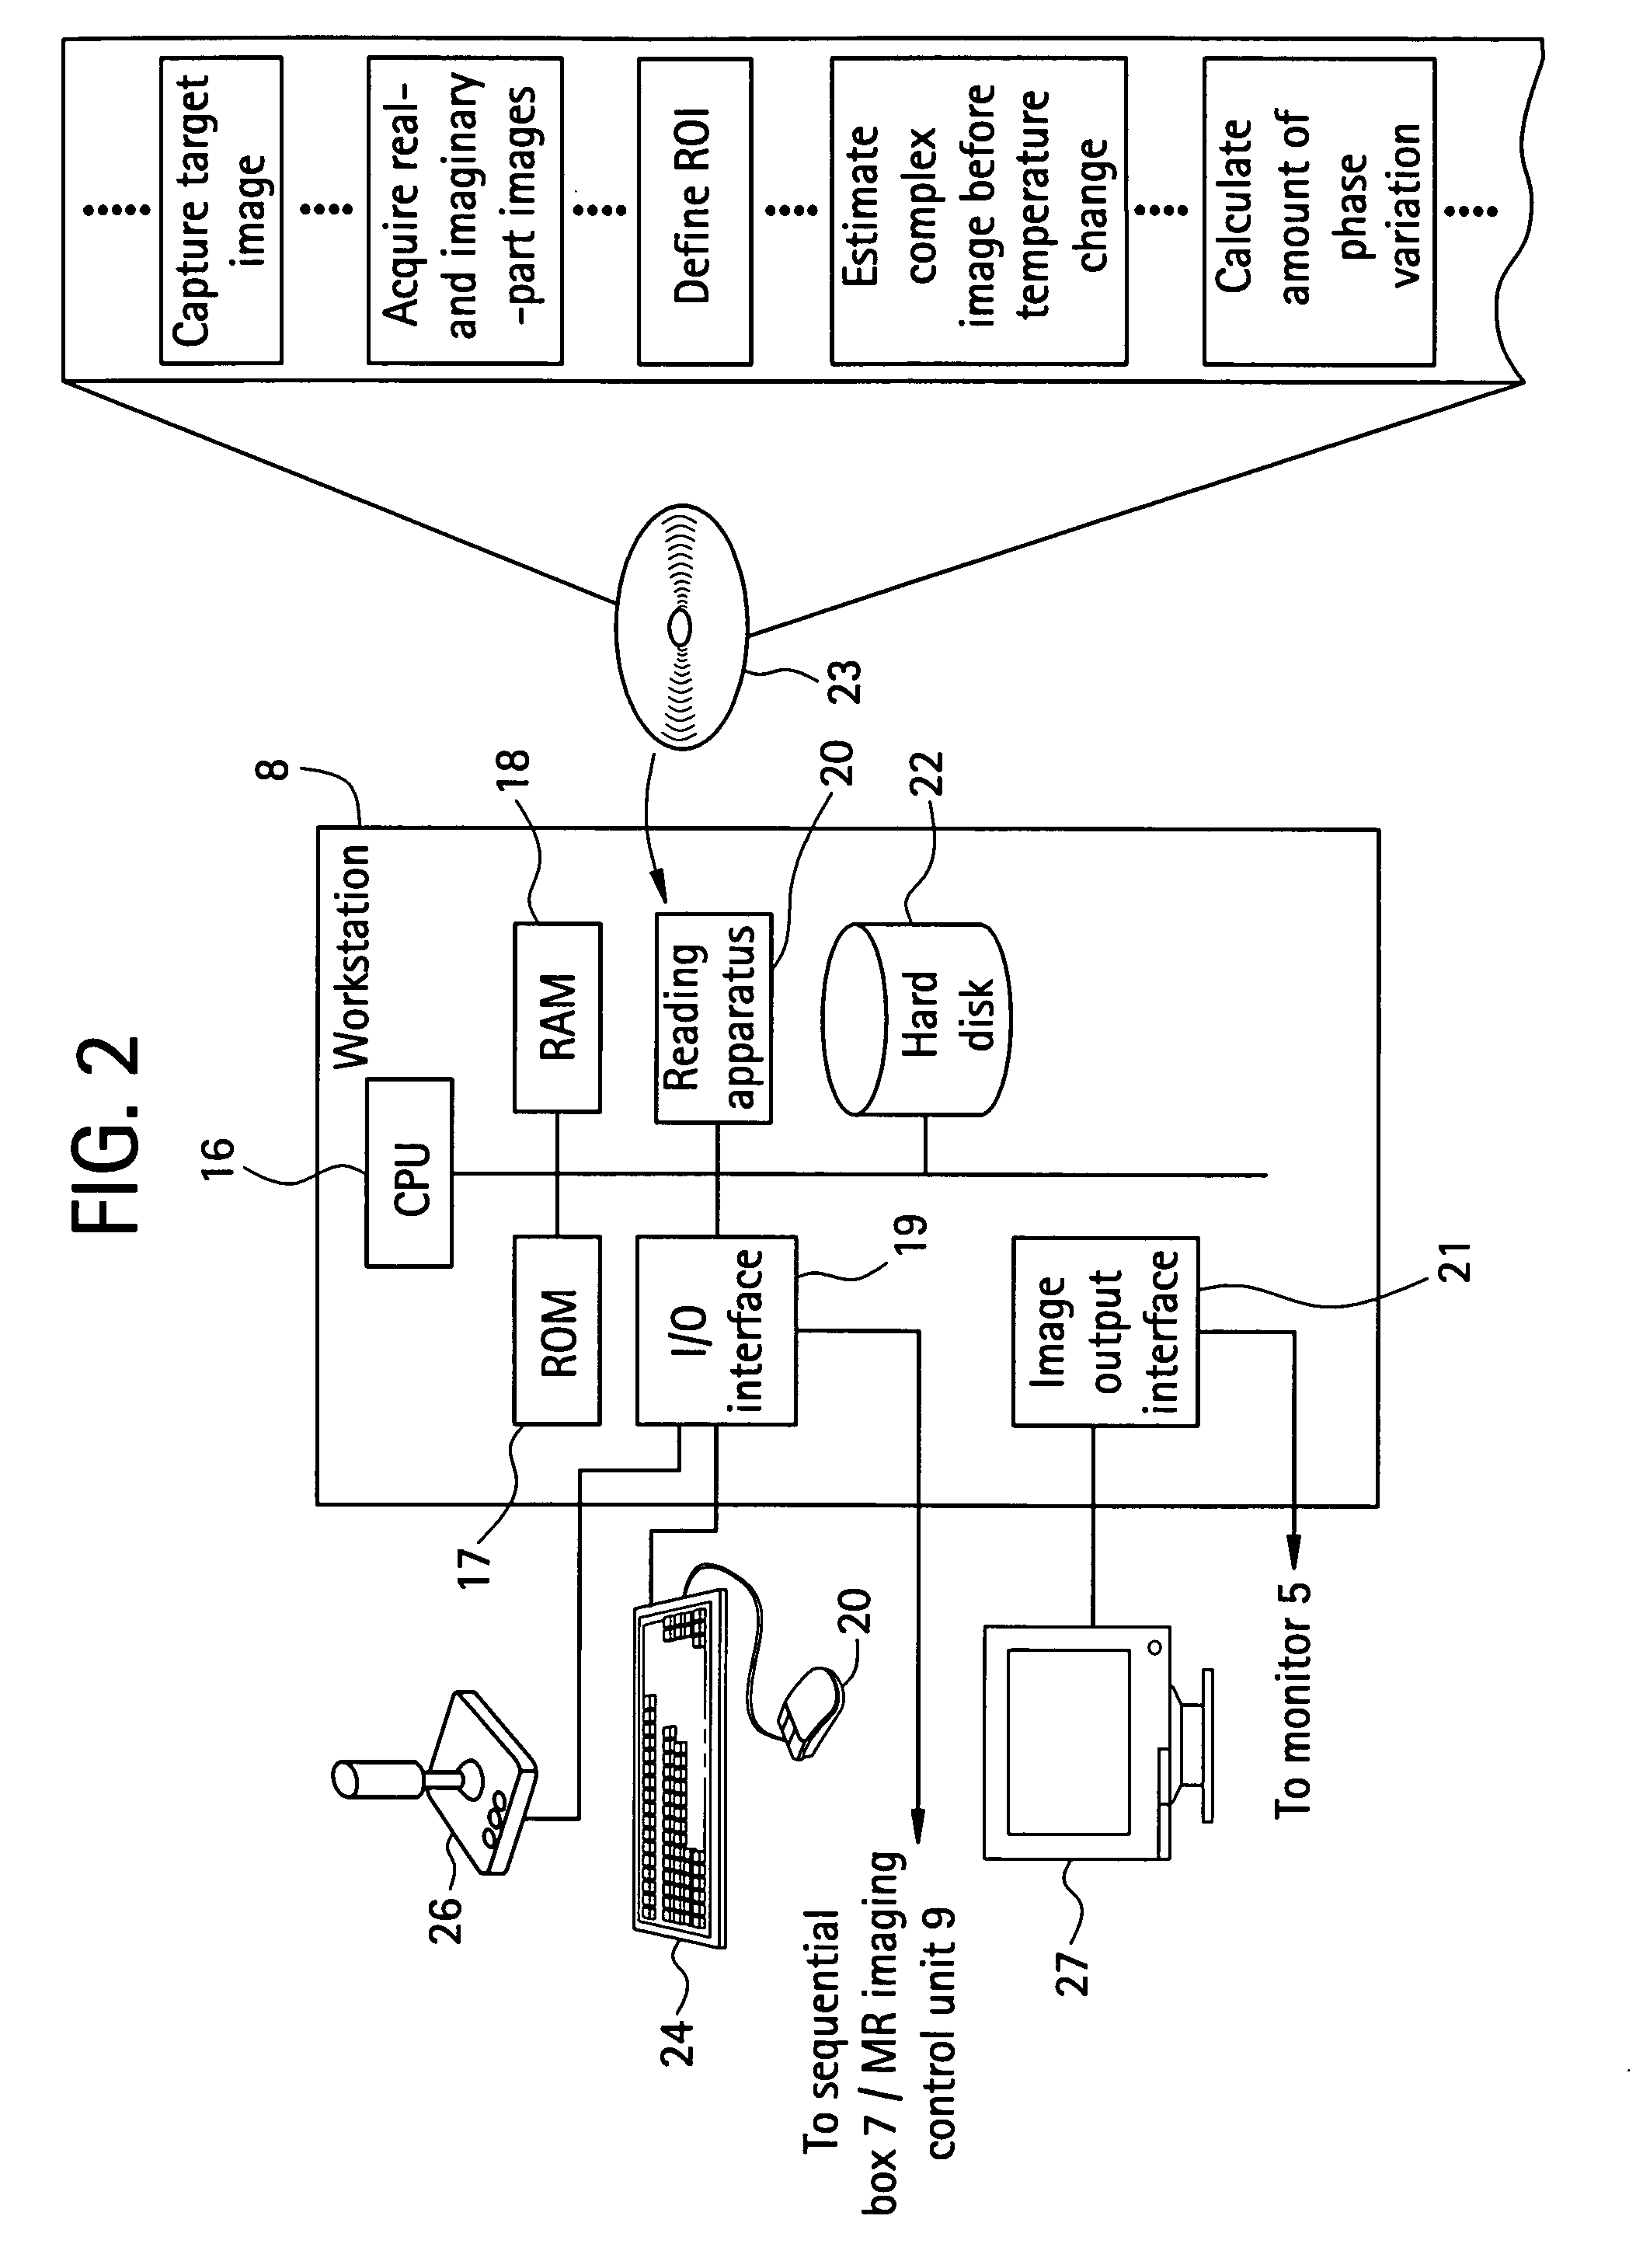 Self-referencing/body motion tracking non-invasive internal temperature distribution measurement method and apparatus using magnetic resonance tomographic imaging technique